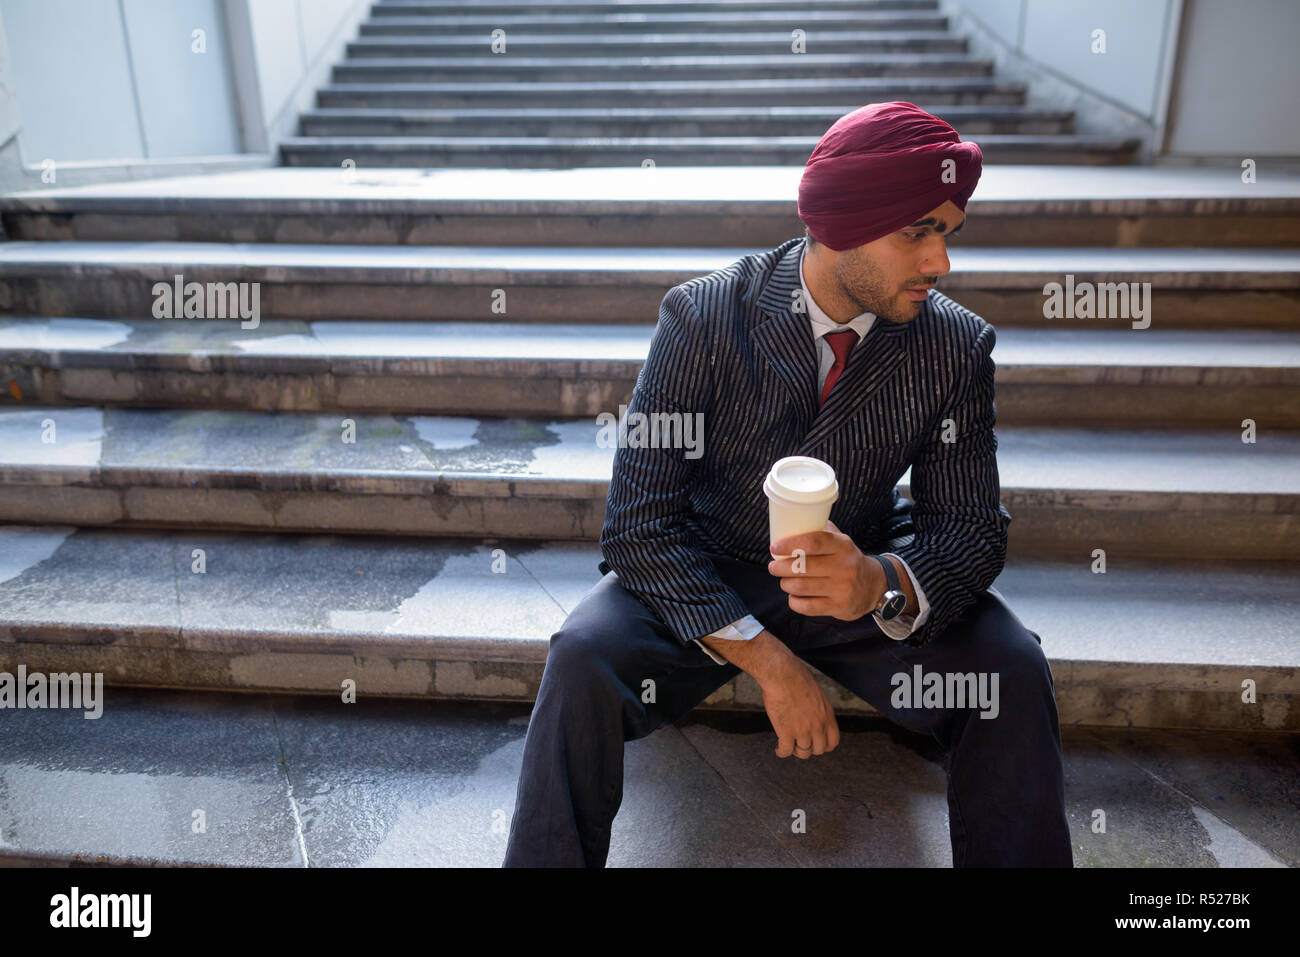 Portrait of Indian businessman sitting on stairs outdoors in city Stock Photo